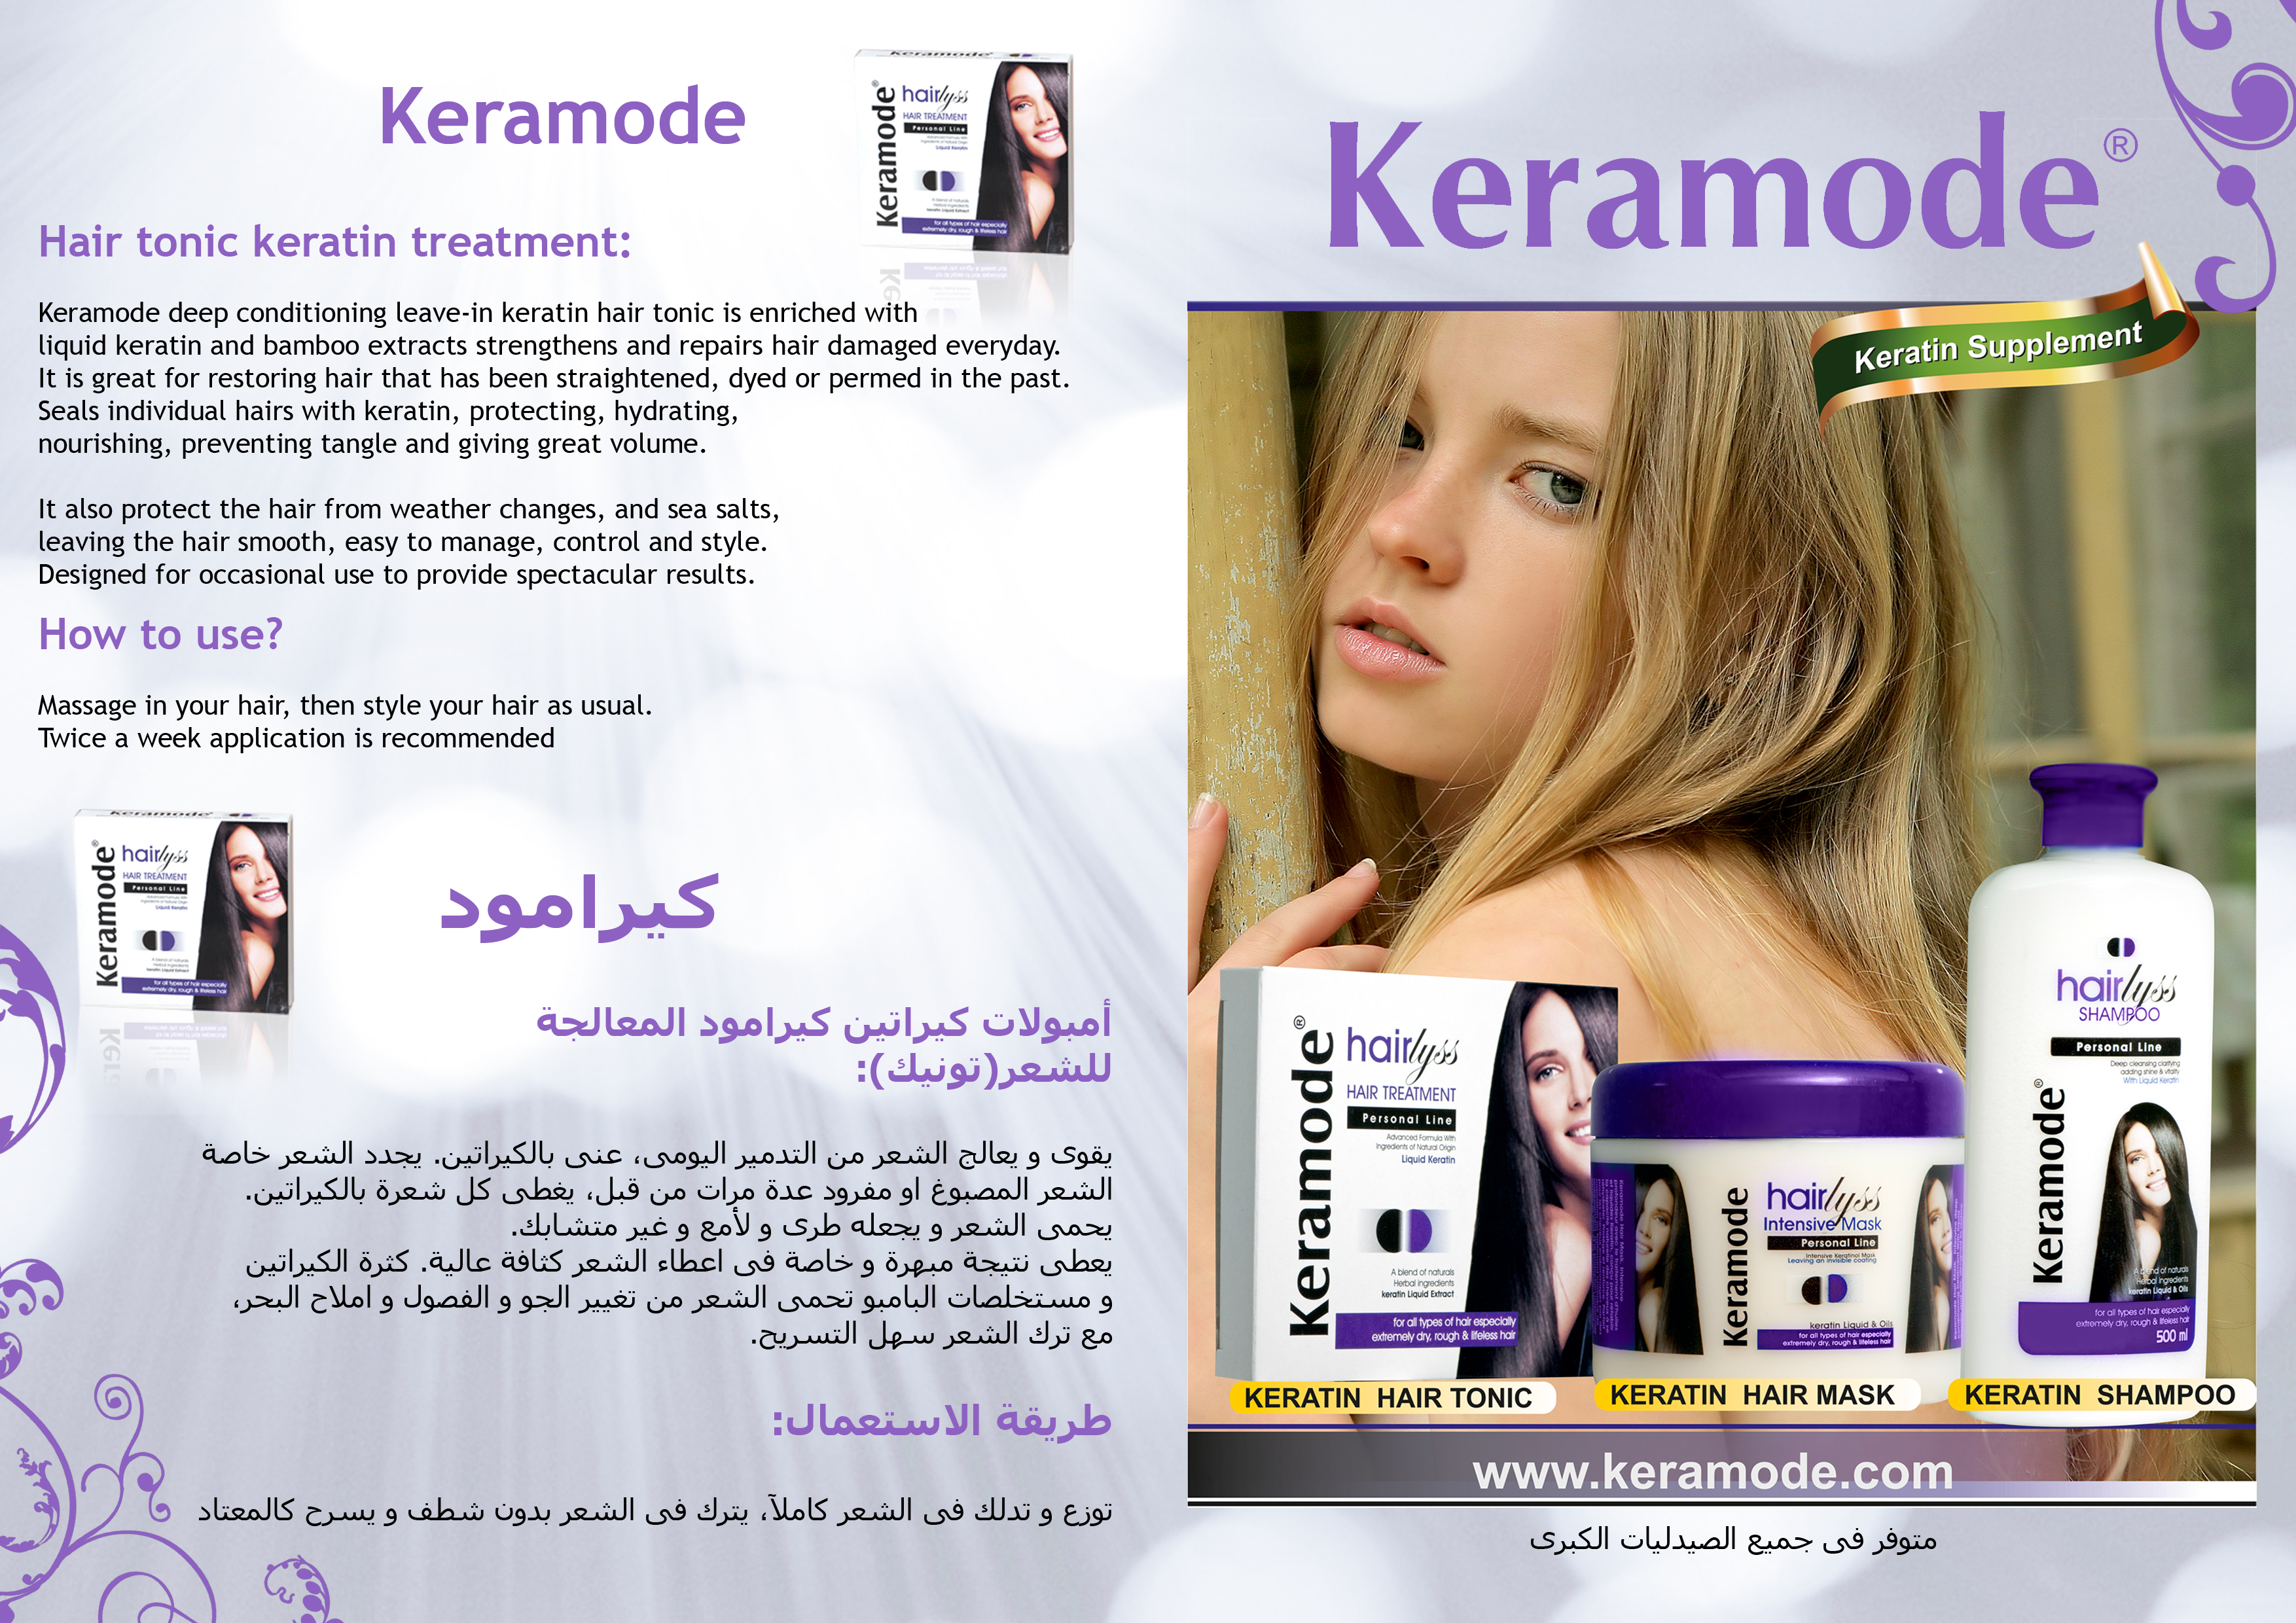 Product image - Natural keratin based hair care products line